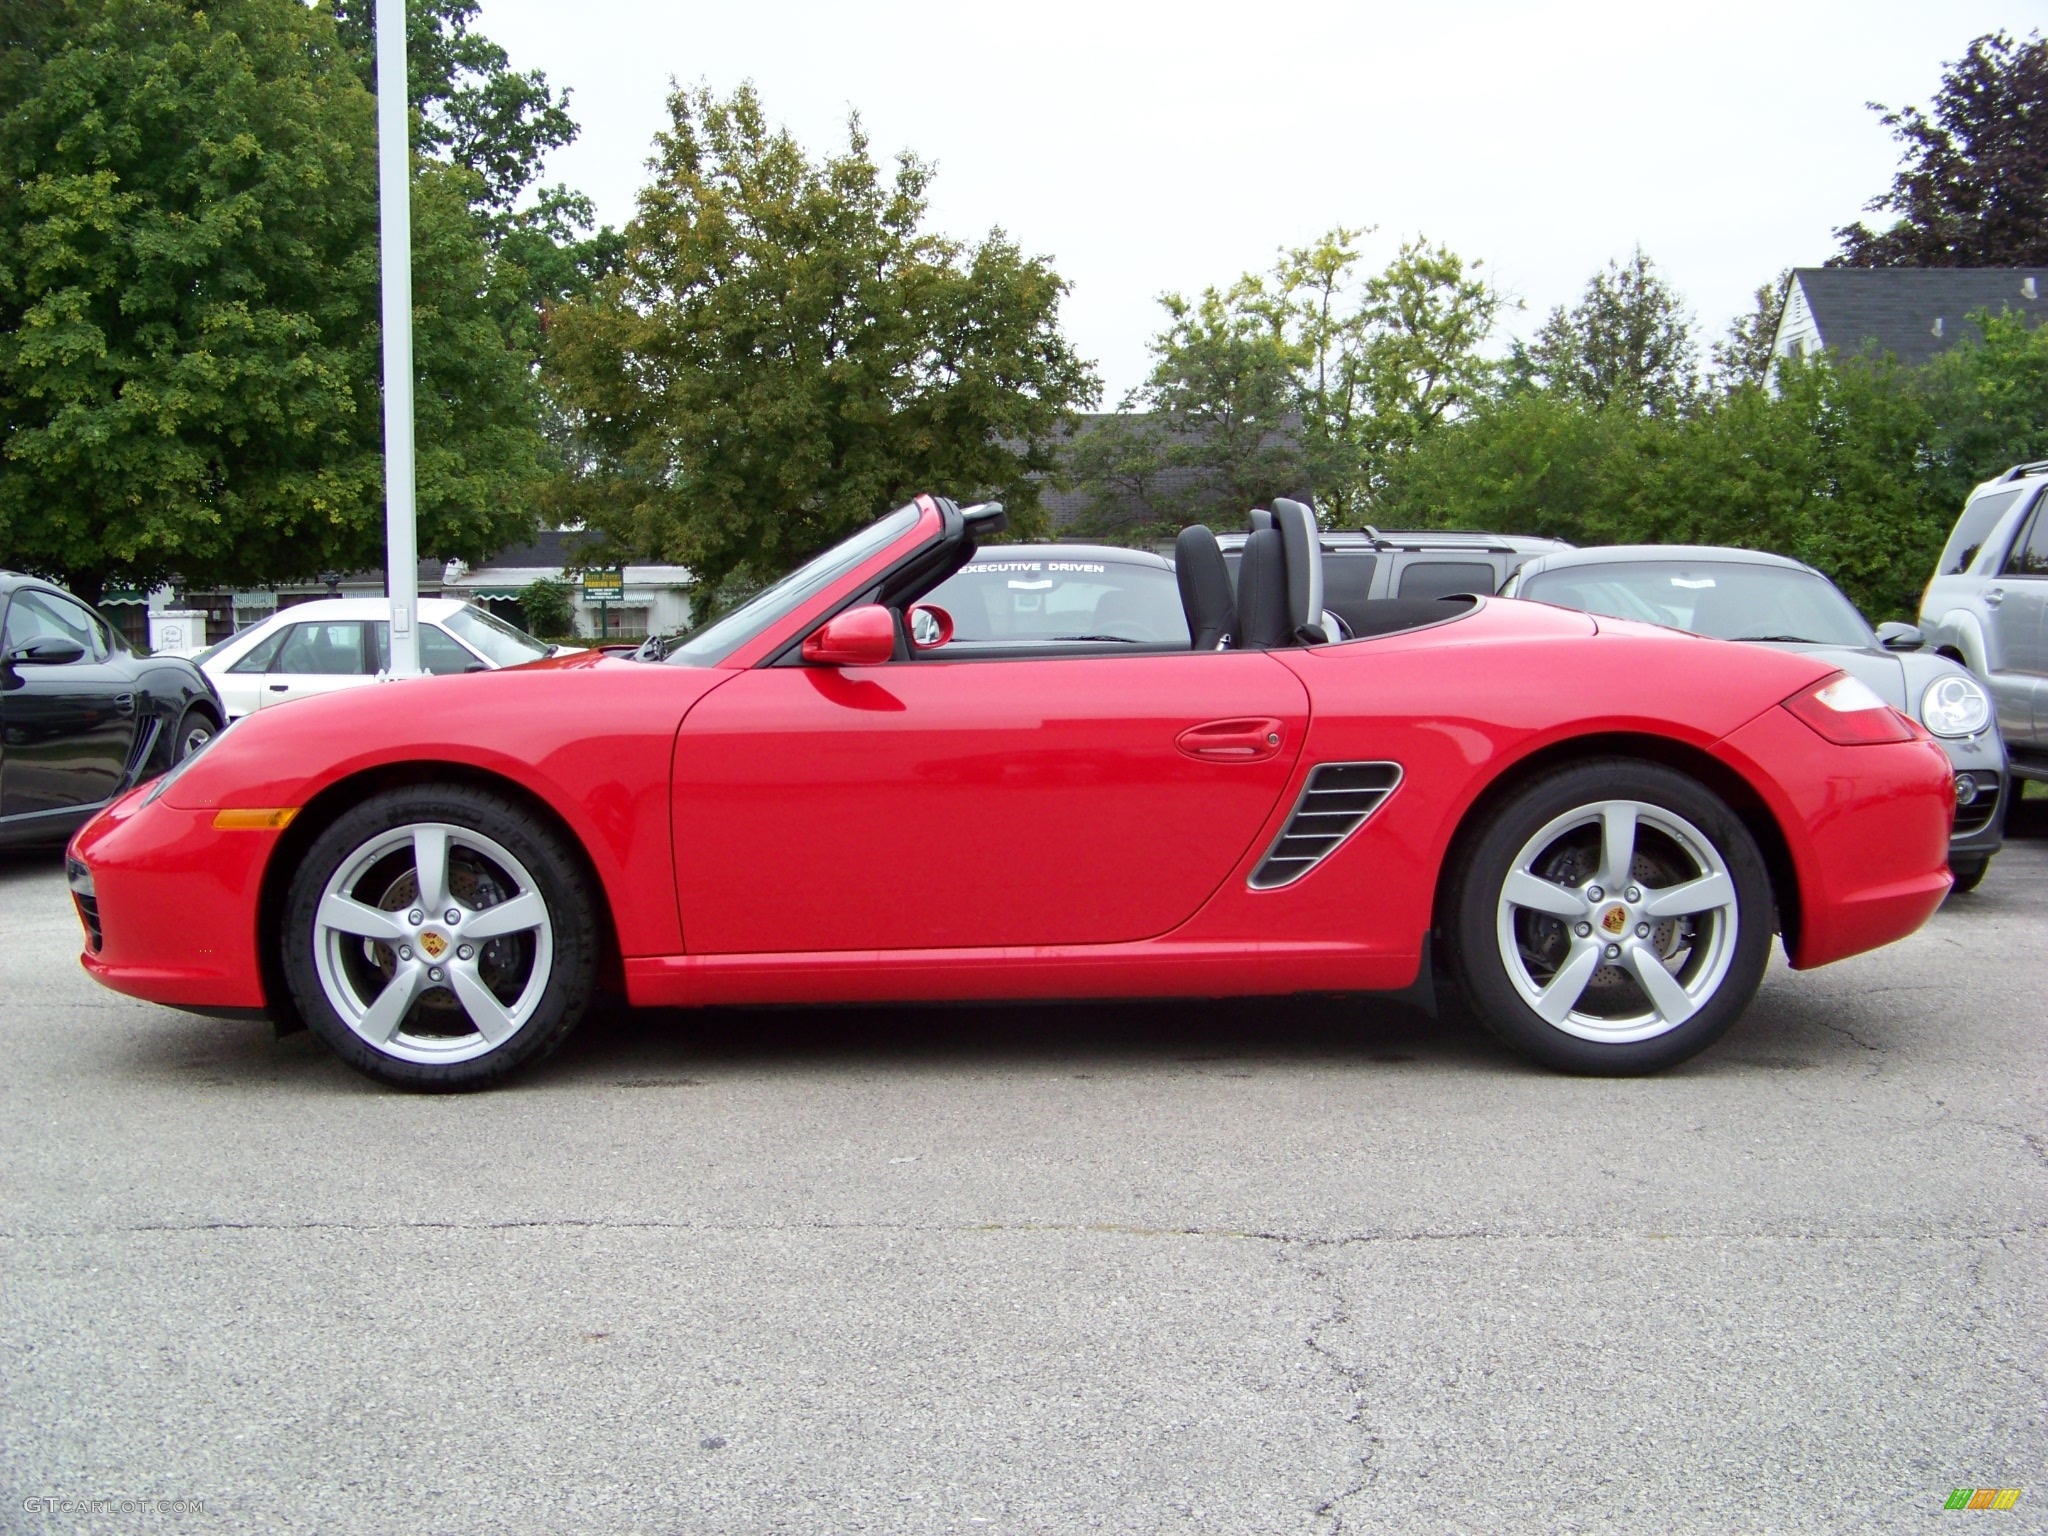 2008 Boxster  - Guards Red / Black photo #2